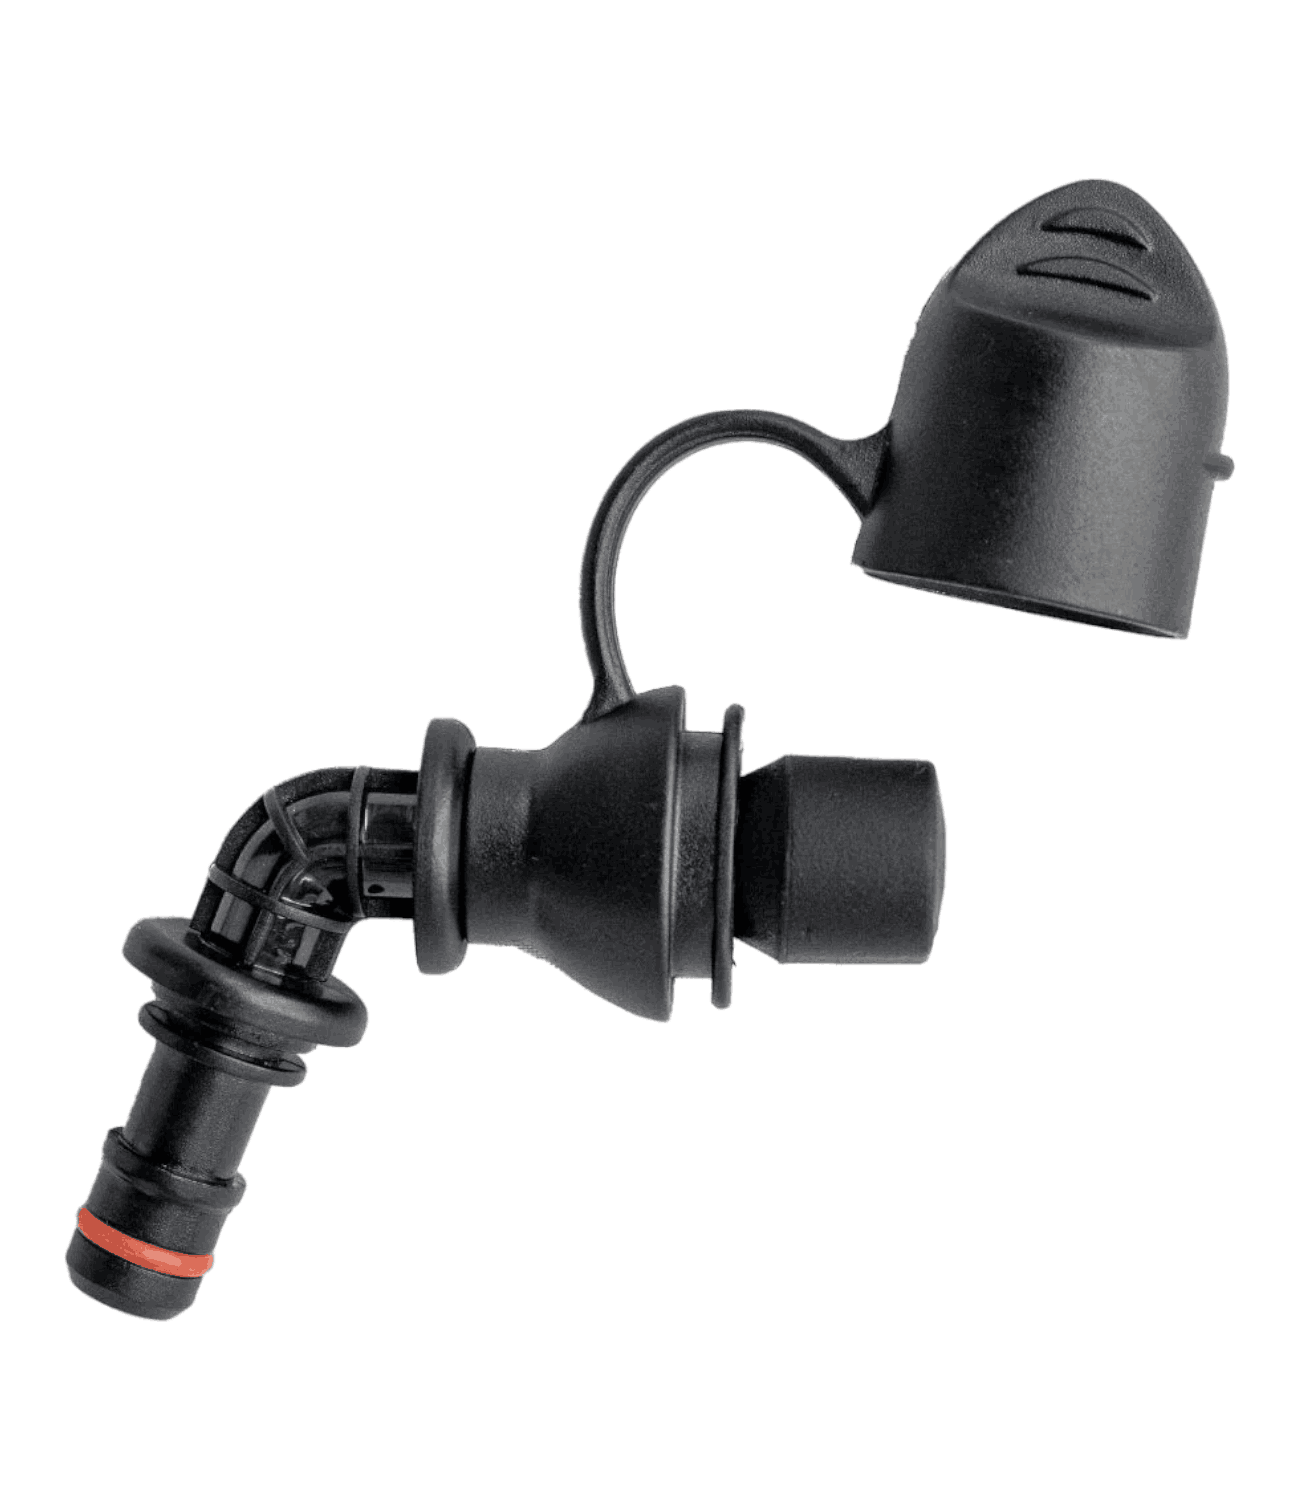 Mototech Replacement Quick Connector Bite Valve for Hydration Reservoir